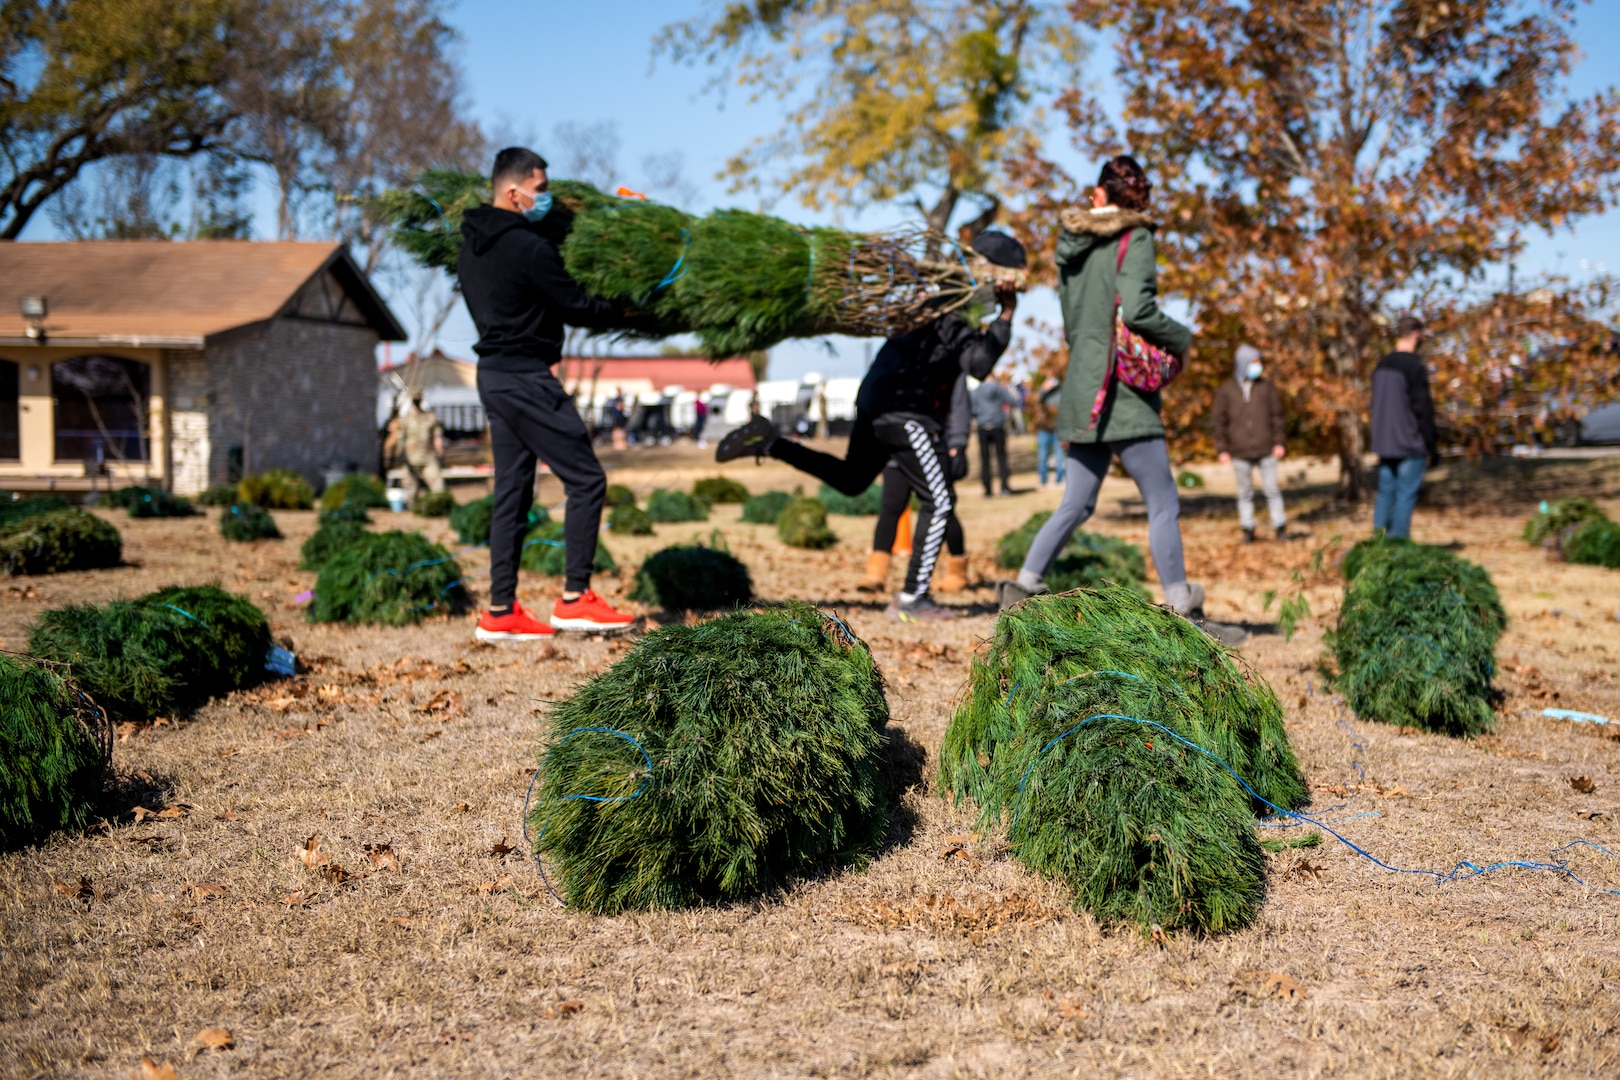 U.S. military members select a Christmas tree during the Trees for Troops event Dec. 3, 2020, at Joint Base San Antonio-Lackland, Texas. Trees for Troops, a program of the Christmas SPIRIT Foundation, provides free, farm-grown Christmas trees to members of all branches of the military and their families.